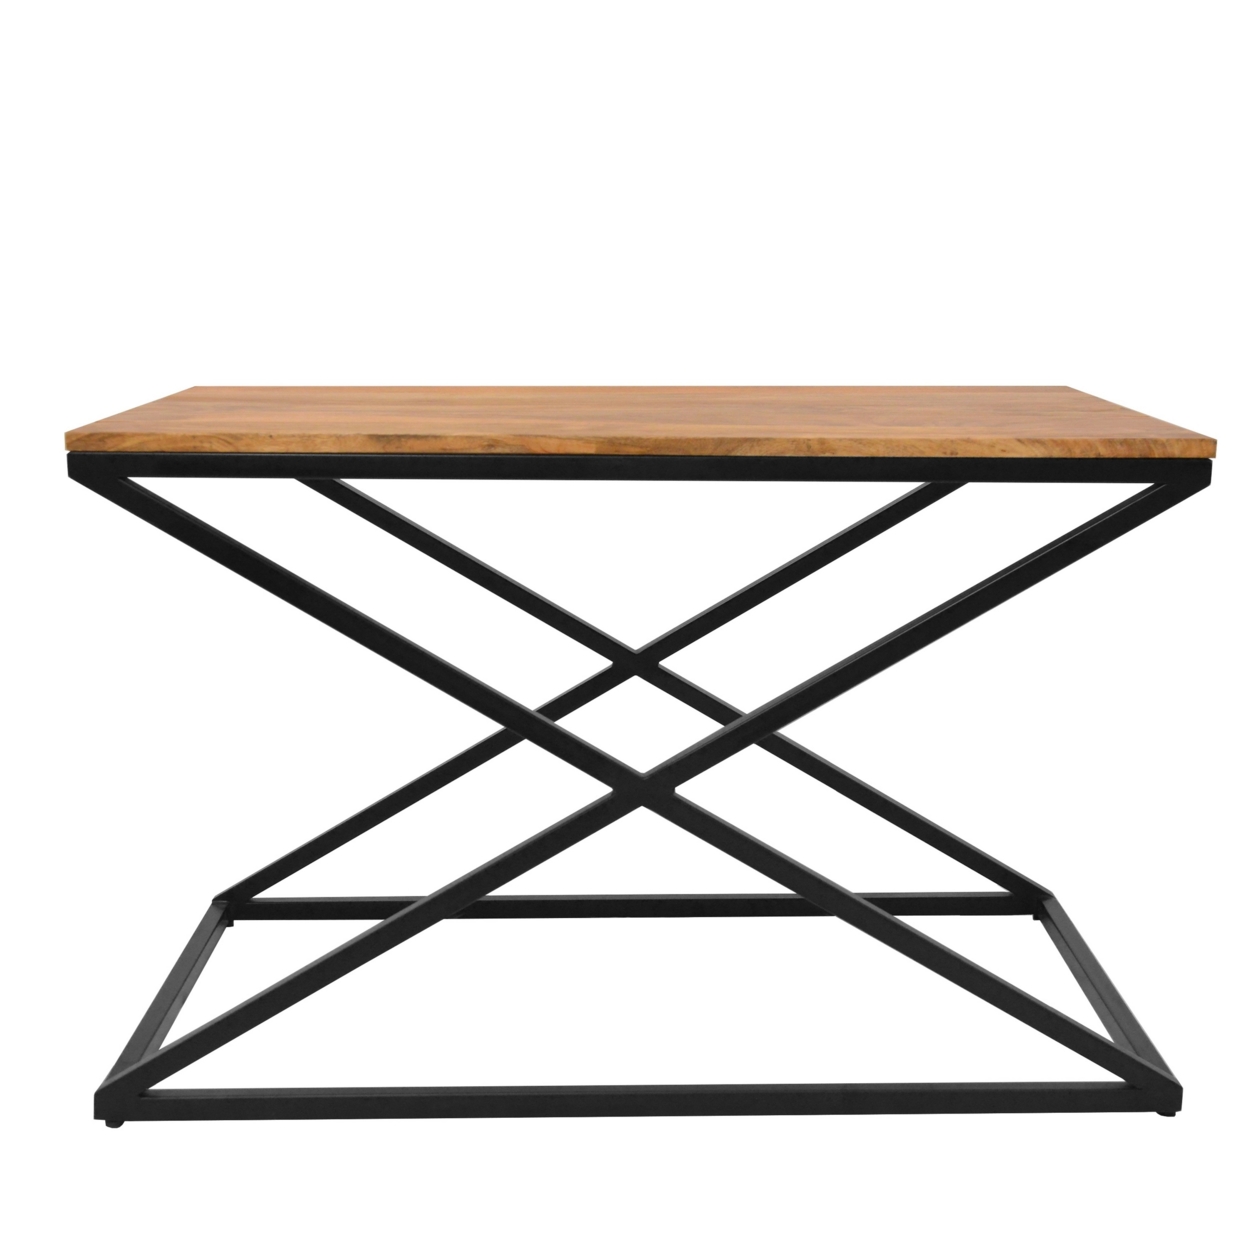 35 Inch Wooden Rectangle Coffee Table With X Shape Metal Frame, Brown And Black- Saltoro Sherpi